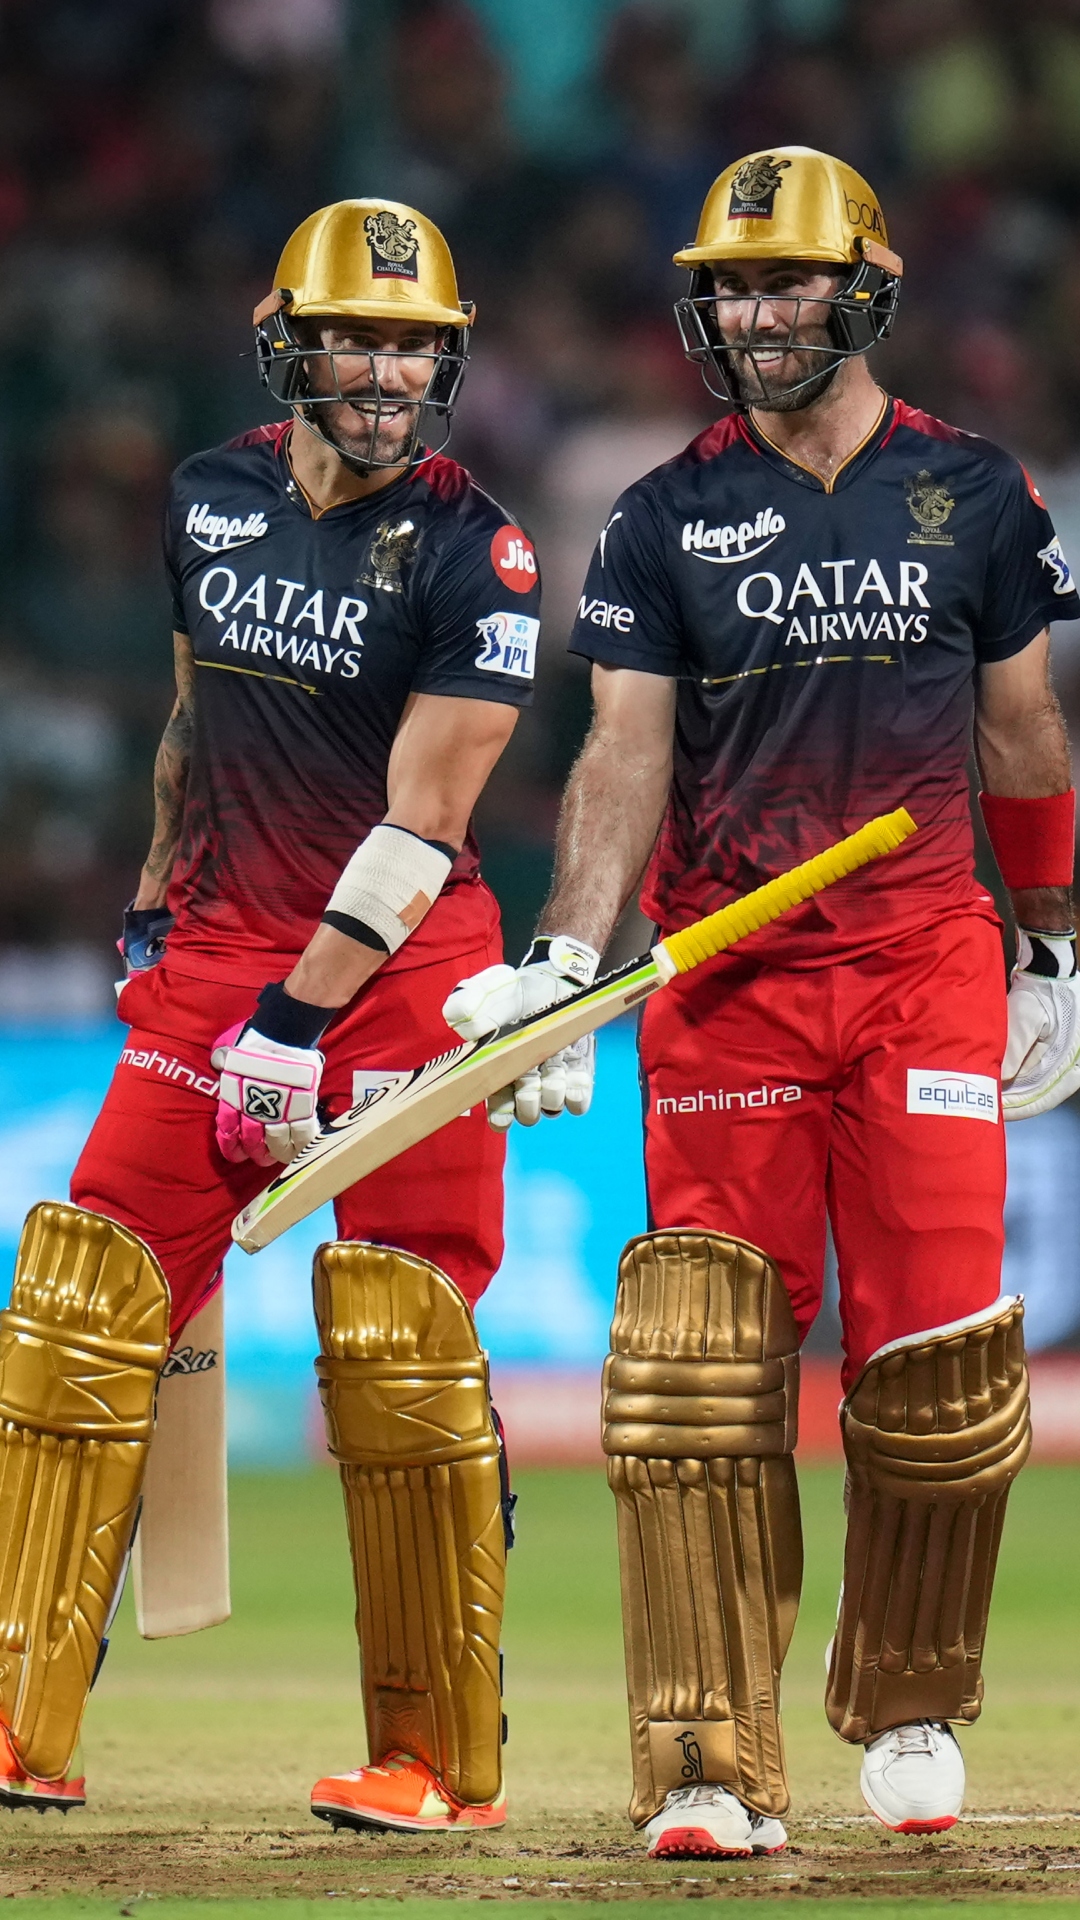 IPL 2023: Players to hit most sixes in tournament feat. Glenn Maxwell and Faf du Plessis (as of 24th April 2023)